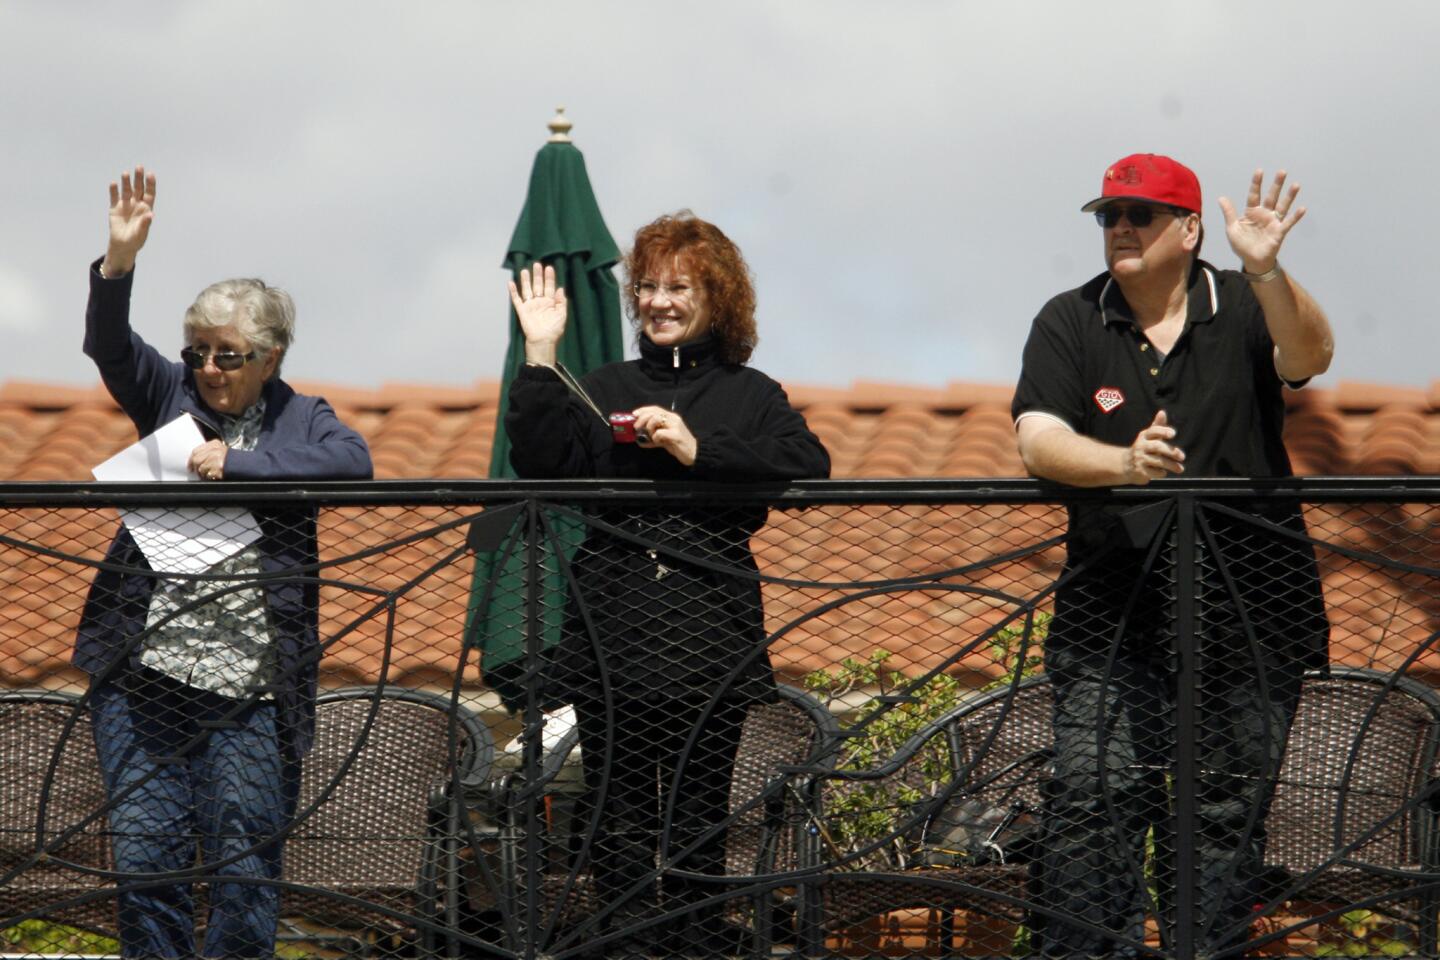 Fran Allen, from left, Gladys Pentland and Steve Alle wave to participants in Burbank on Parade, which took place on Olive Ave. between Keystone St. and Lomita St. on Saturday, April 14, 2012.